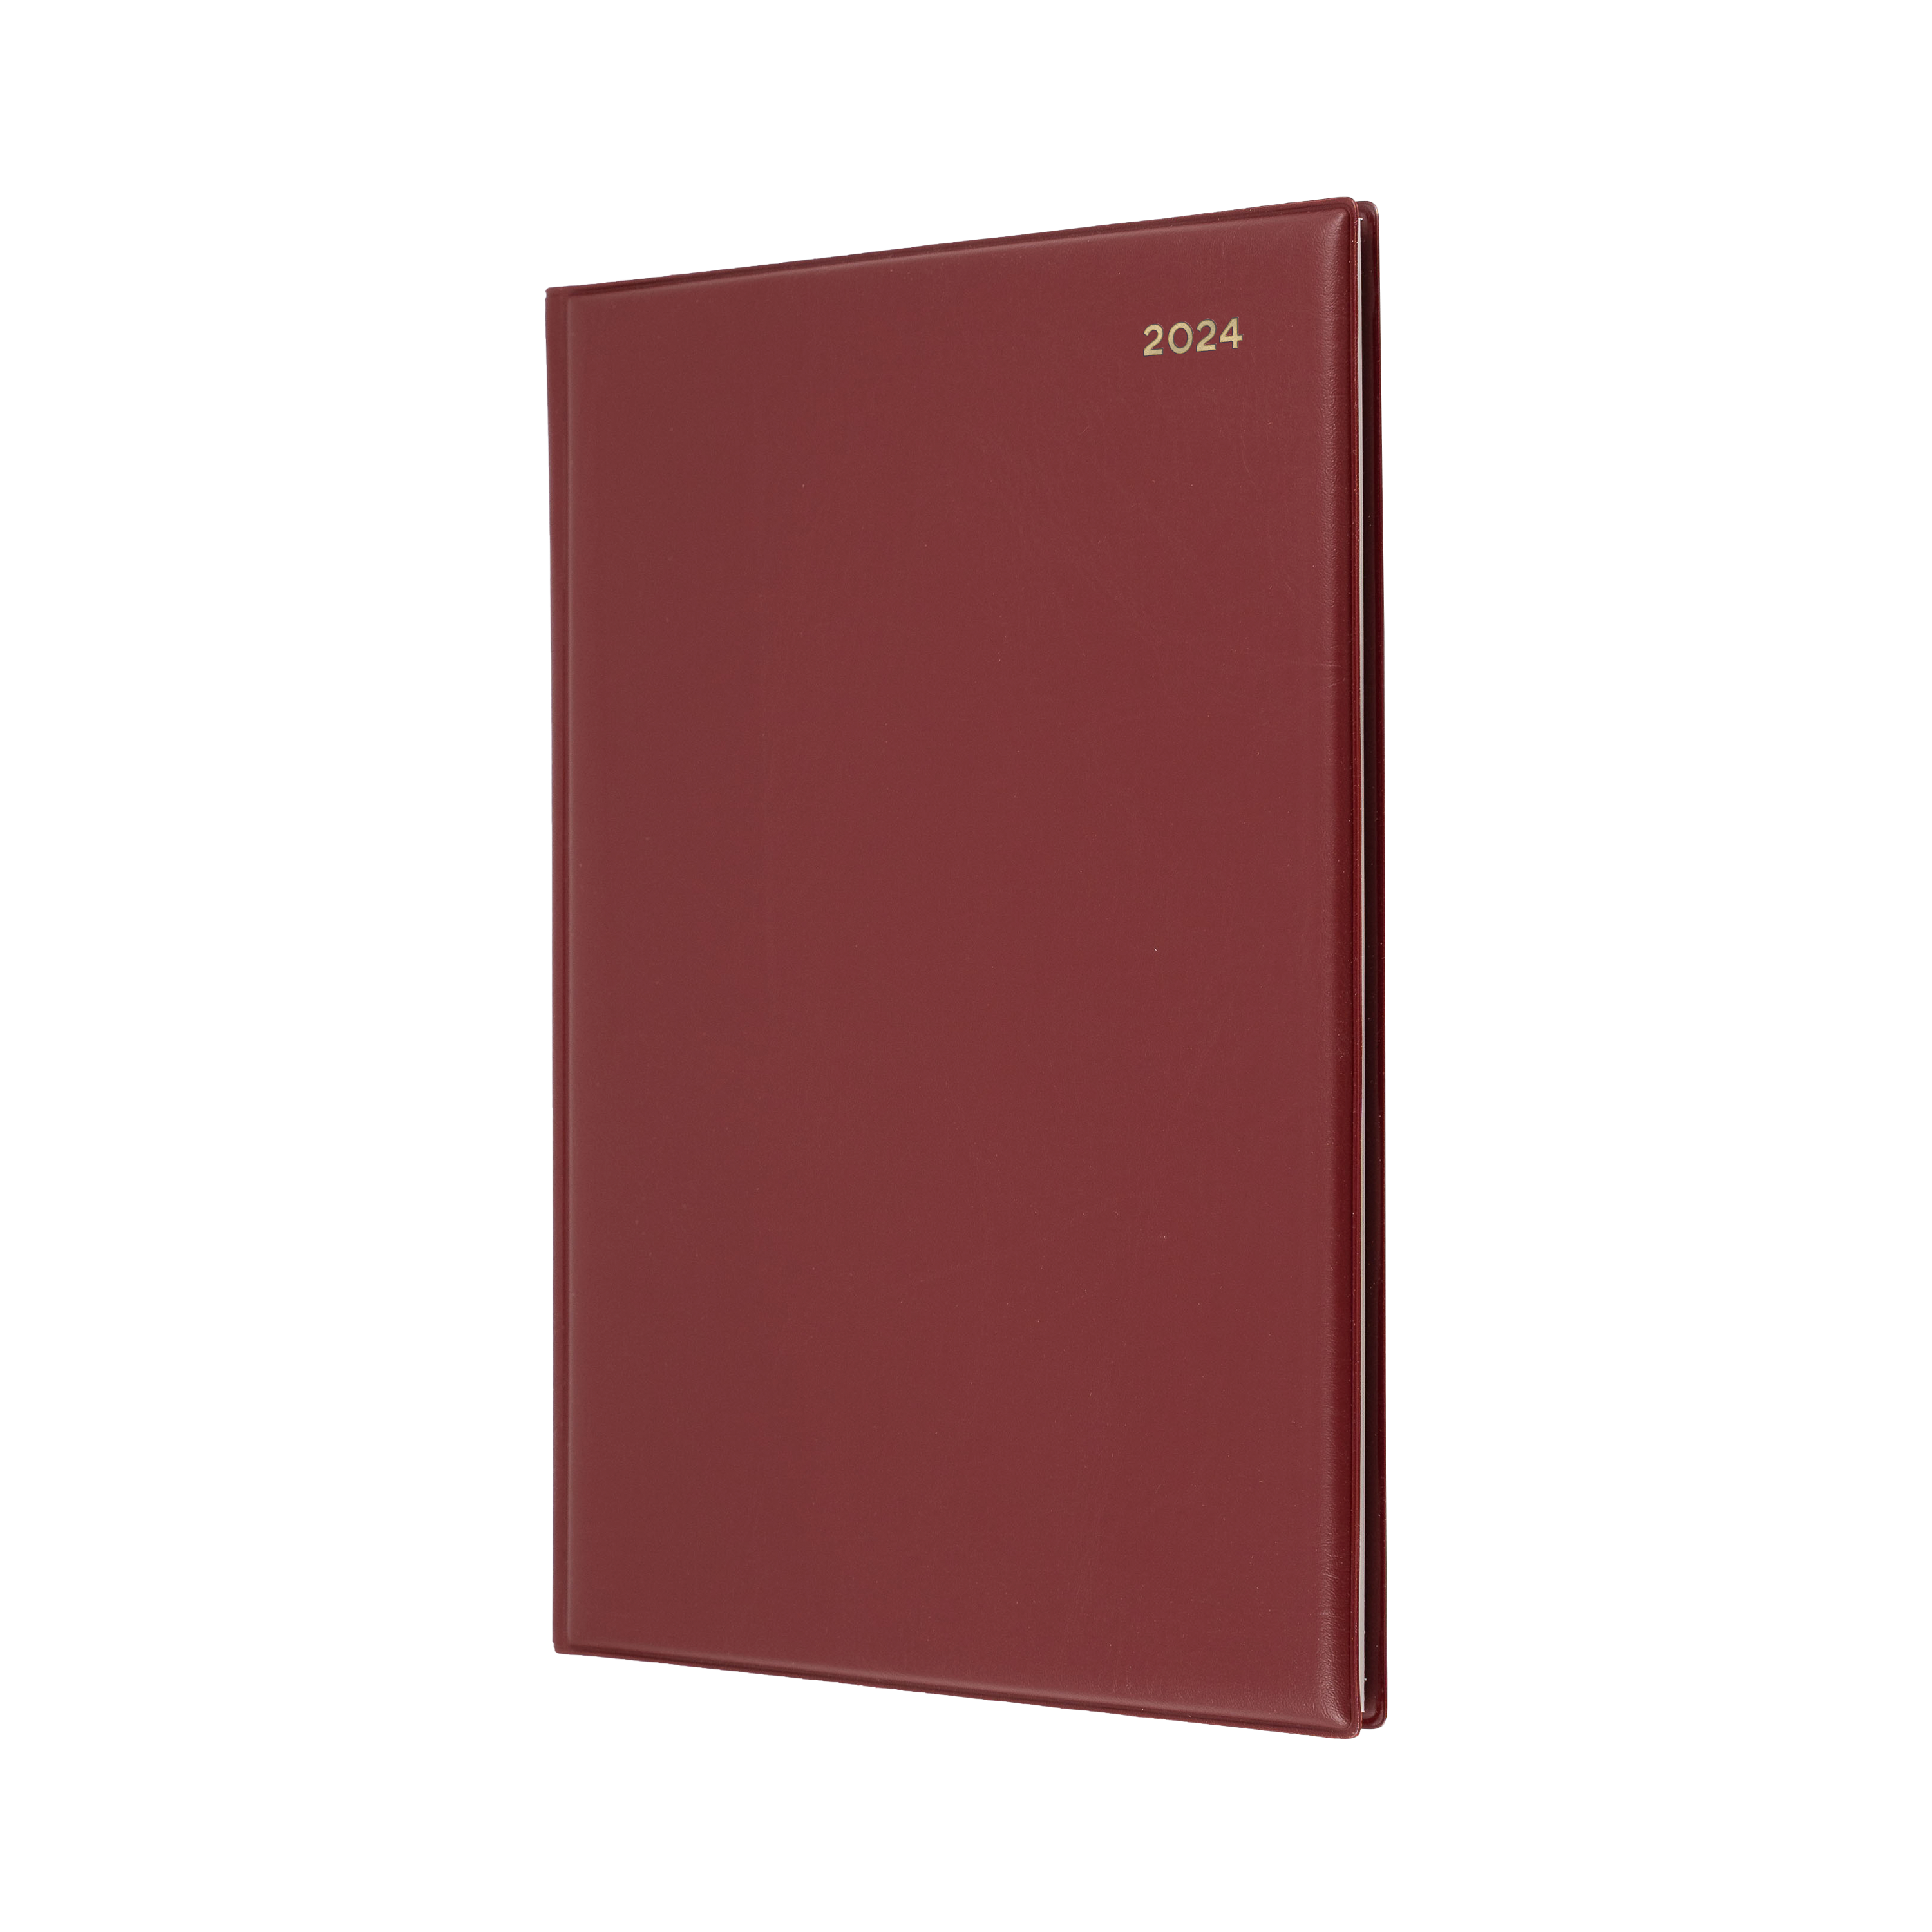 Belmont Desk 2024 Diary - 2 Days to a Page, Size A4 Burgundy / A4 (297 x 210mm)